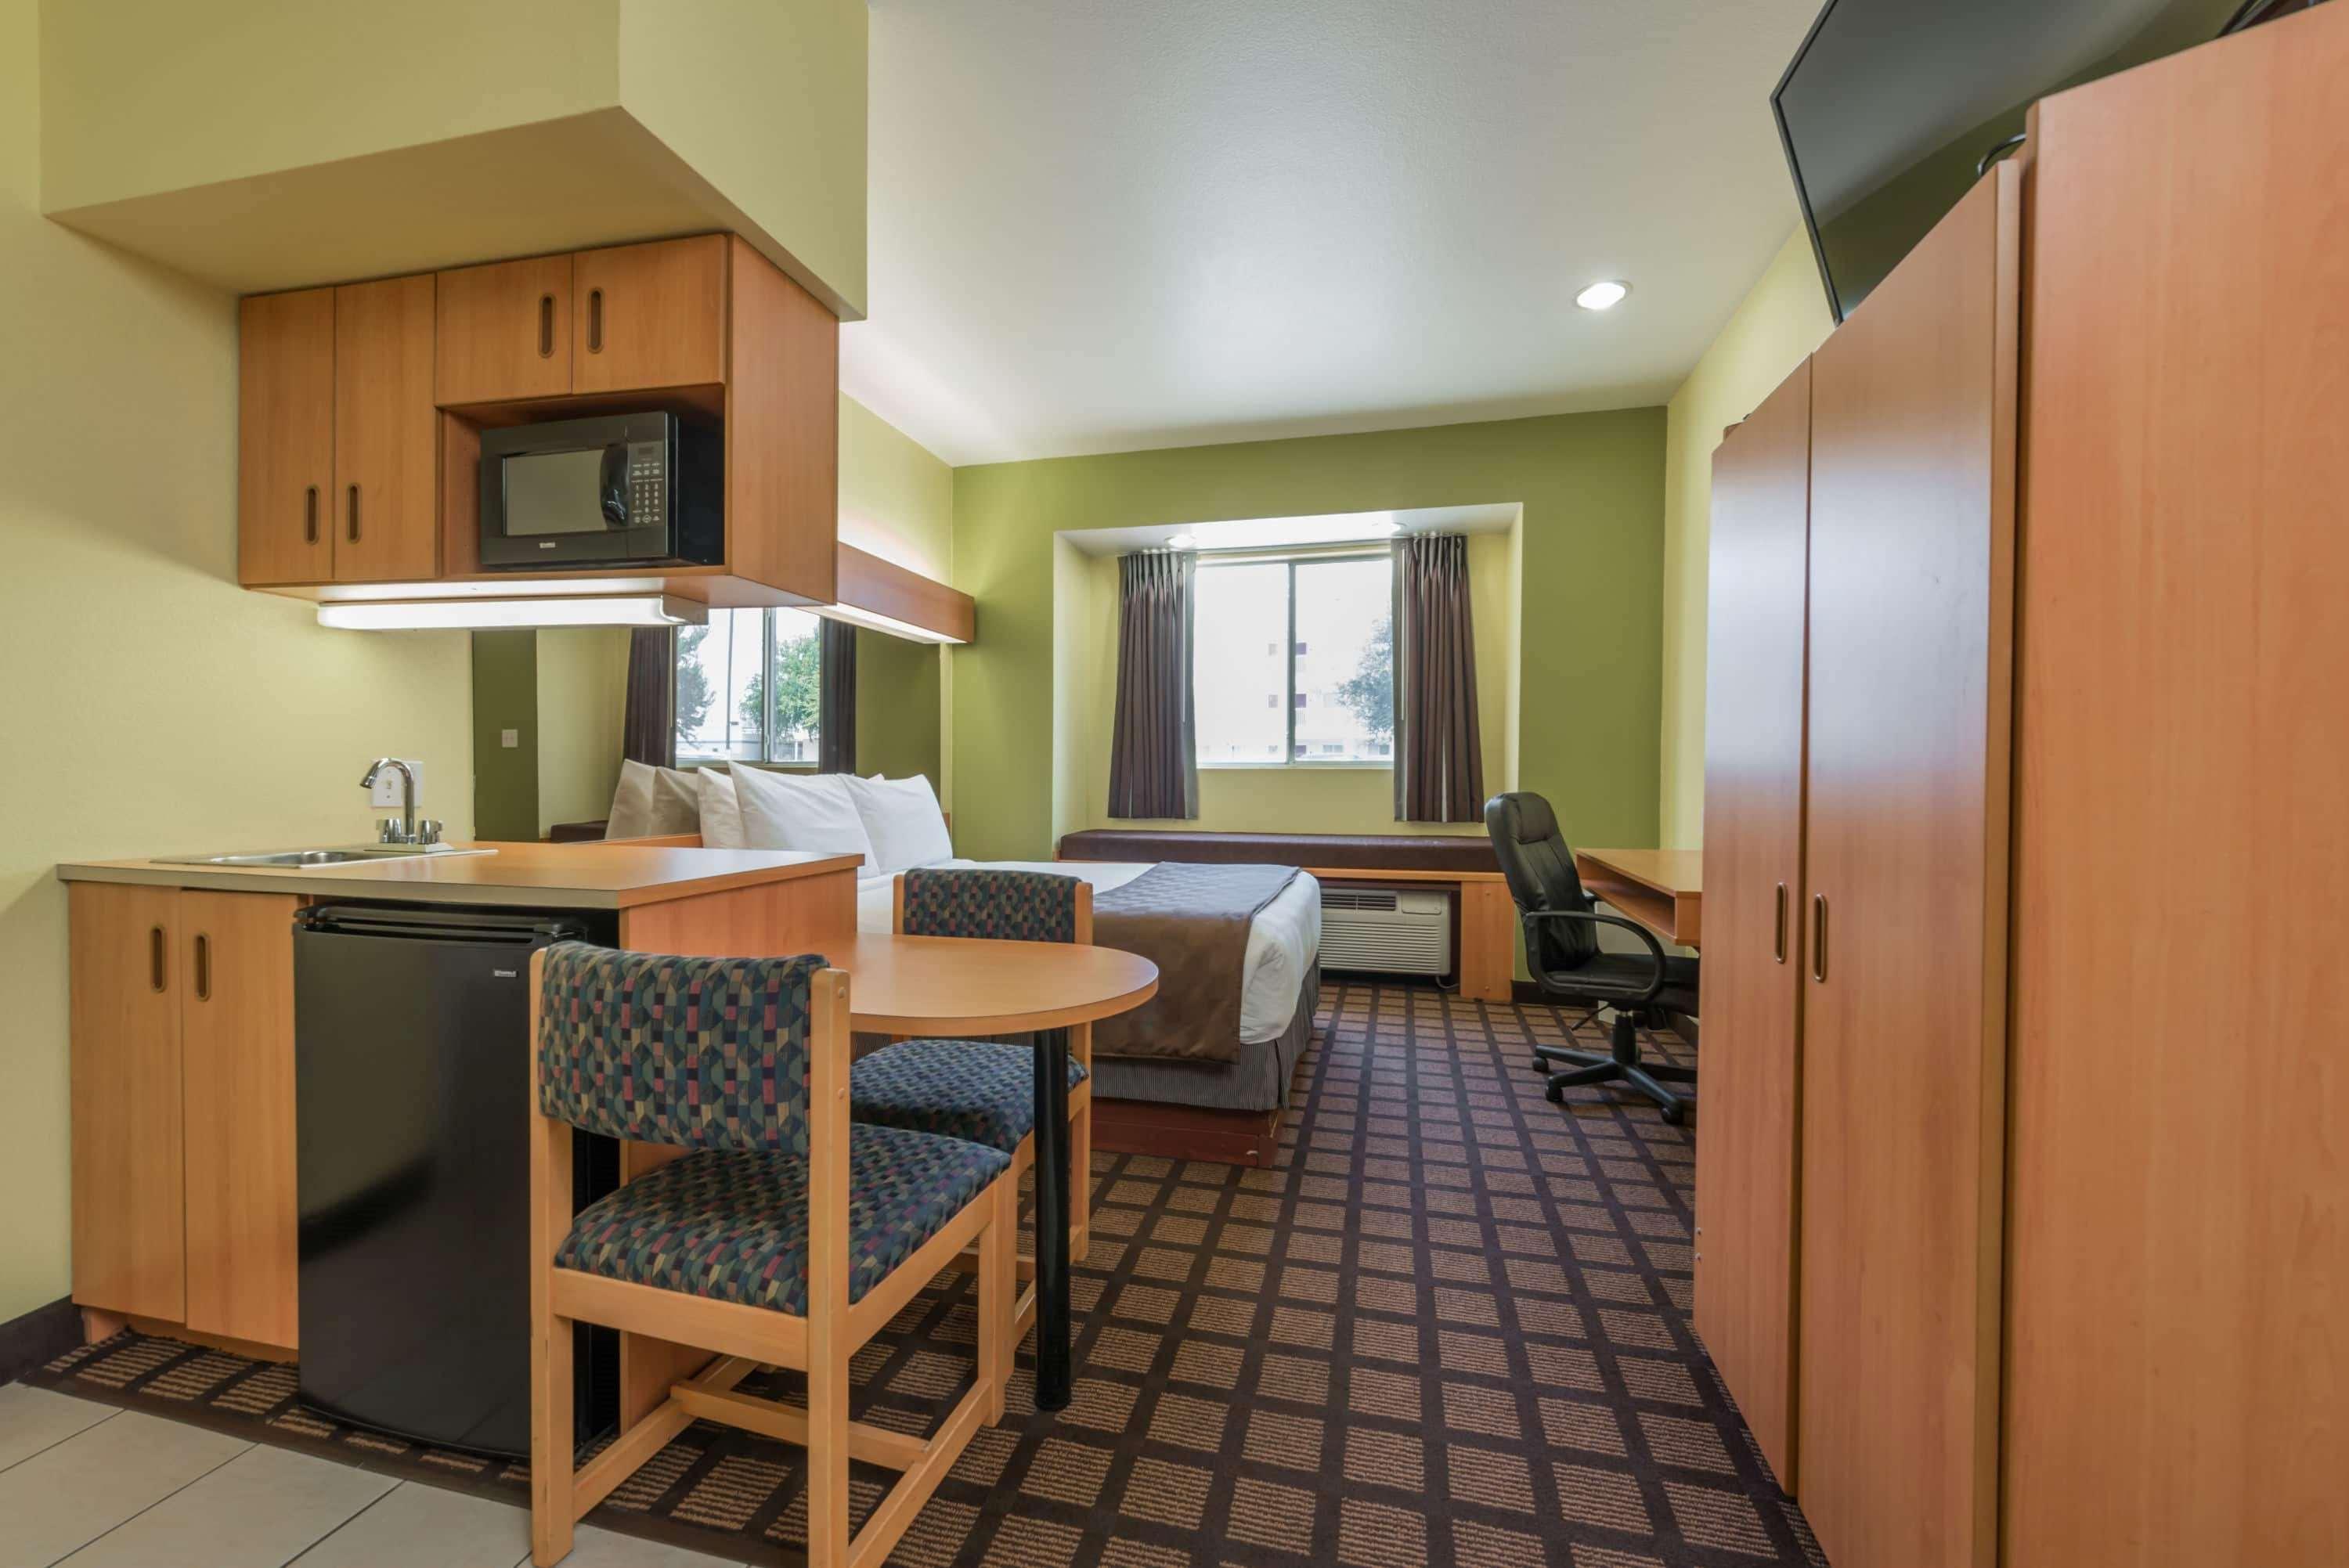 Microtel Inn & Suites By Wyndham Ft. Worth North/At Fossil Fort Worth Luaran gambar